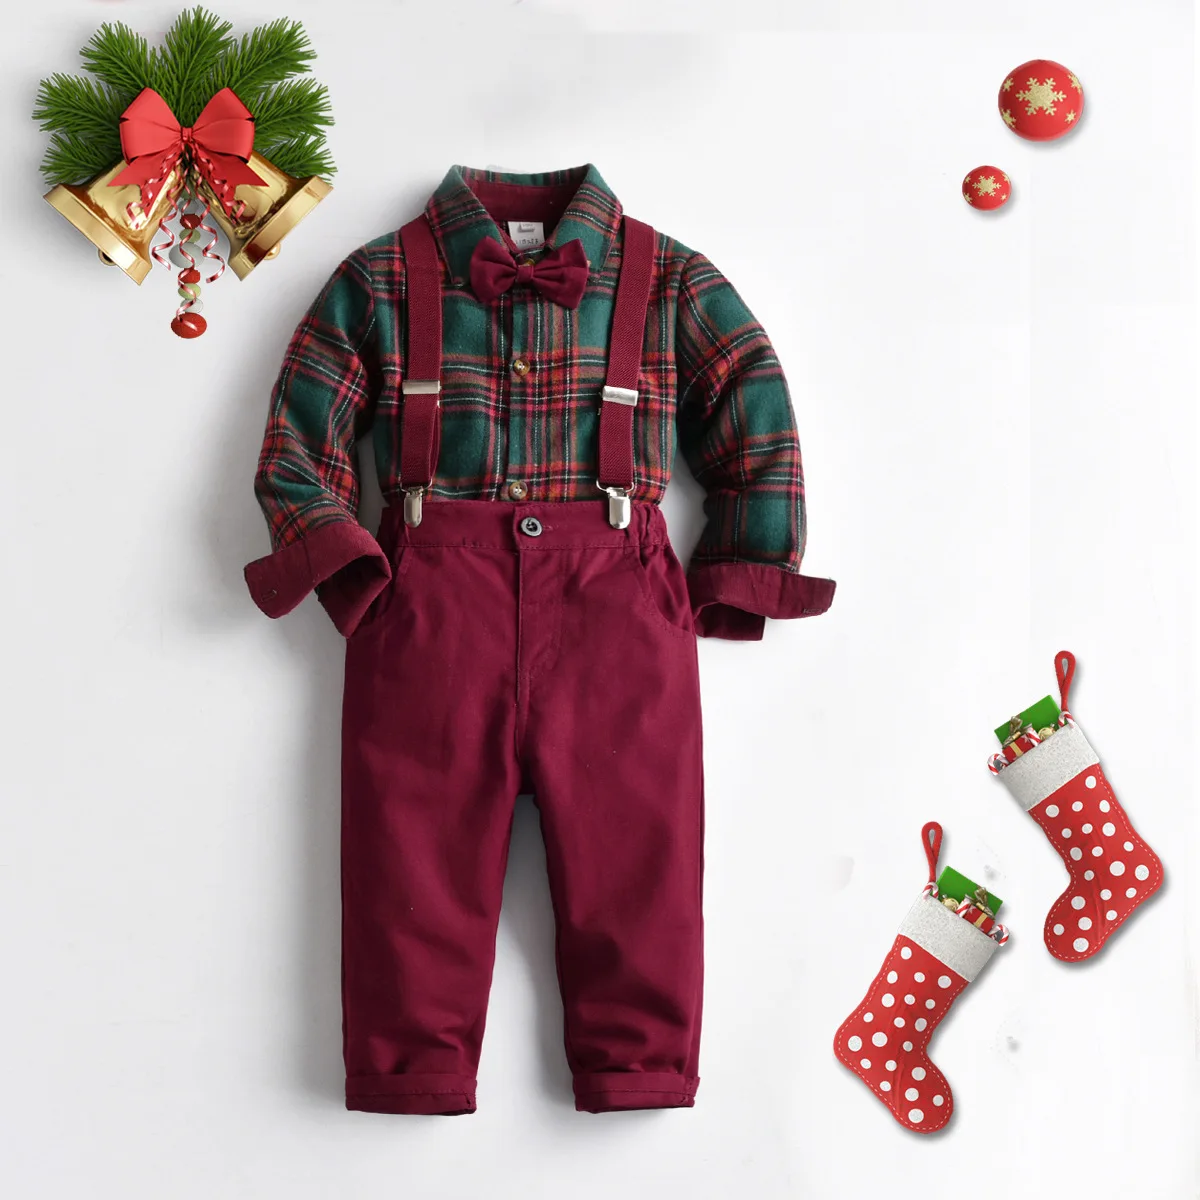 Boys Christmas Outfit Red Plaid T-Shirts Pants Fall Boutique Kids Clothing Young Children's Clothing for Boy Baby Boy Costume